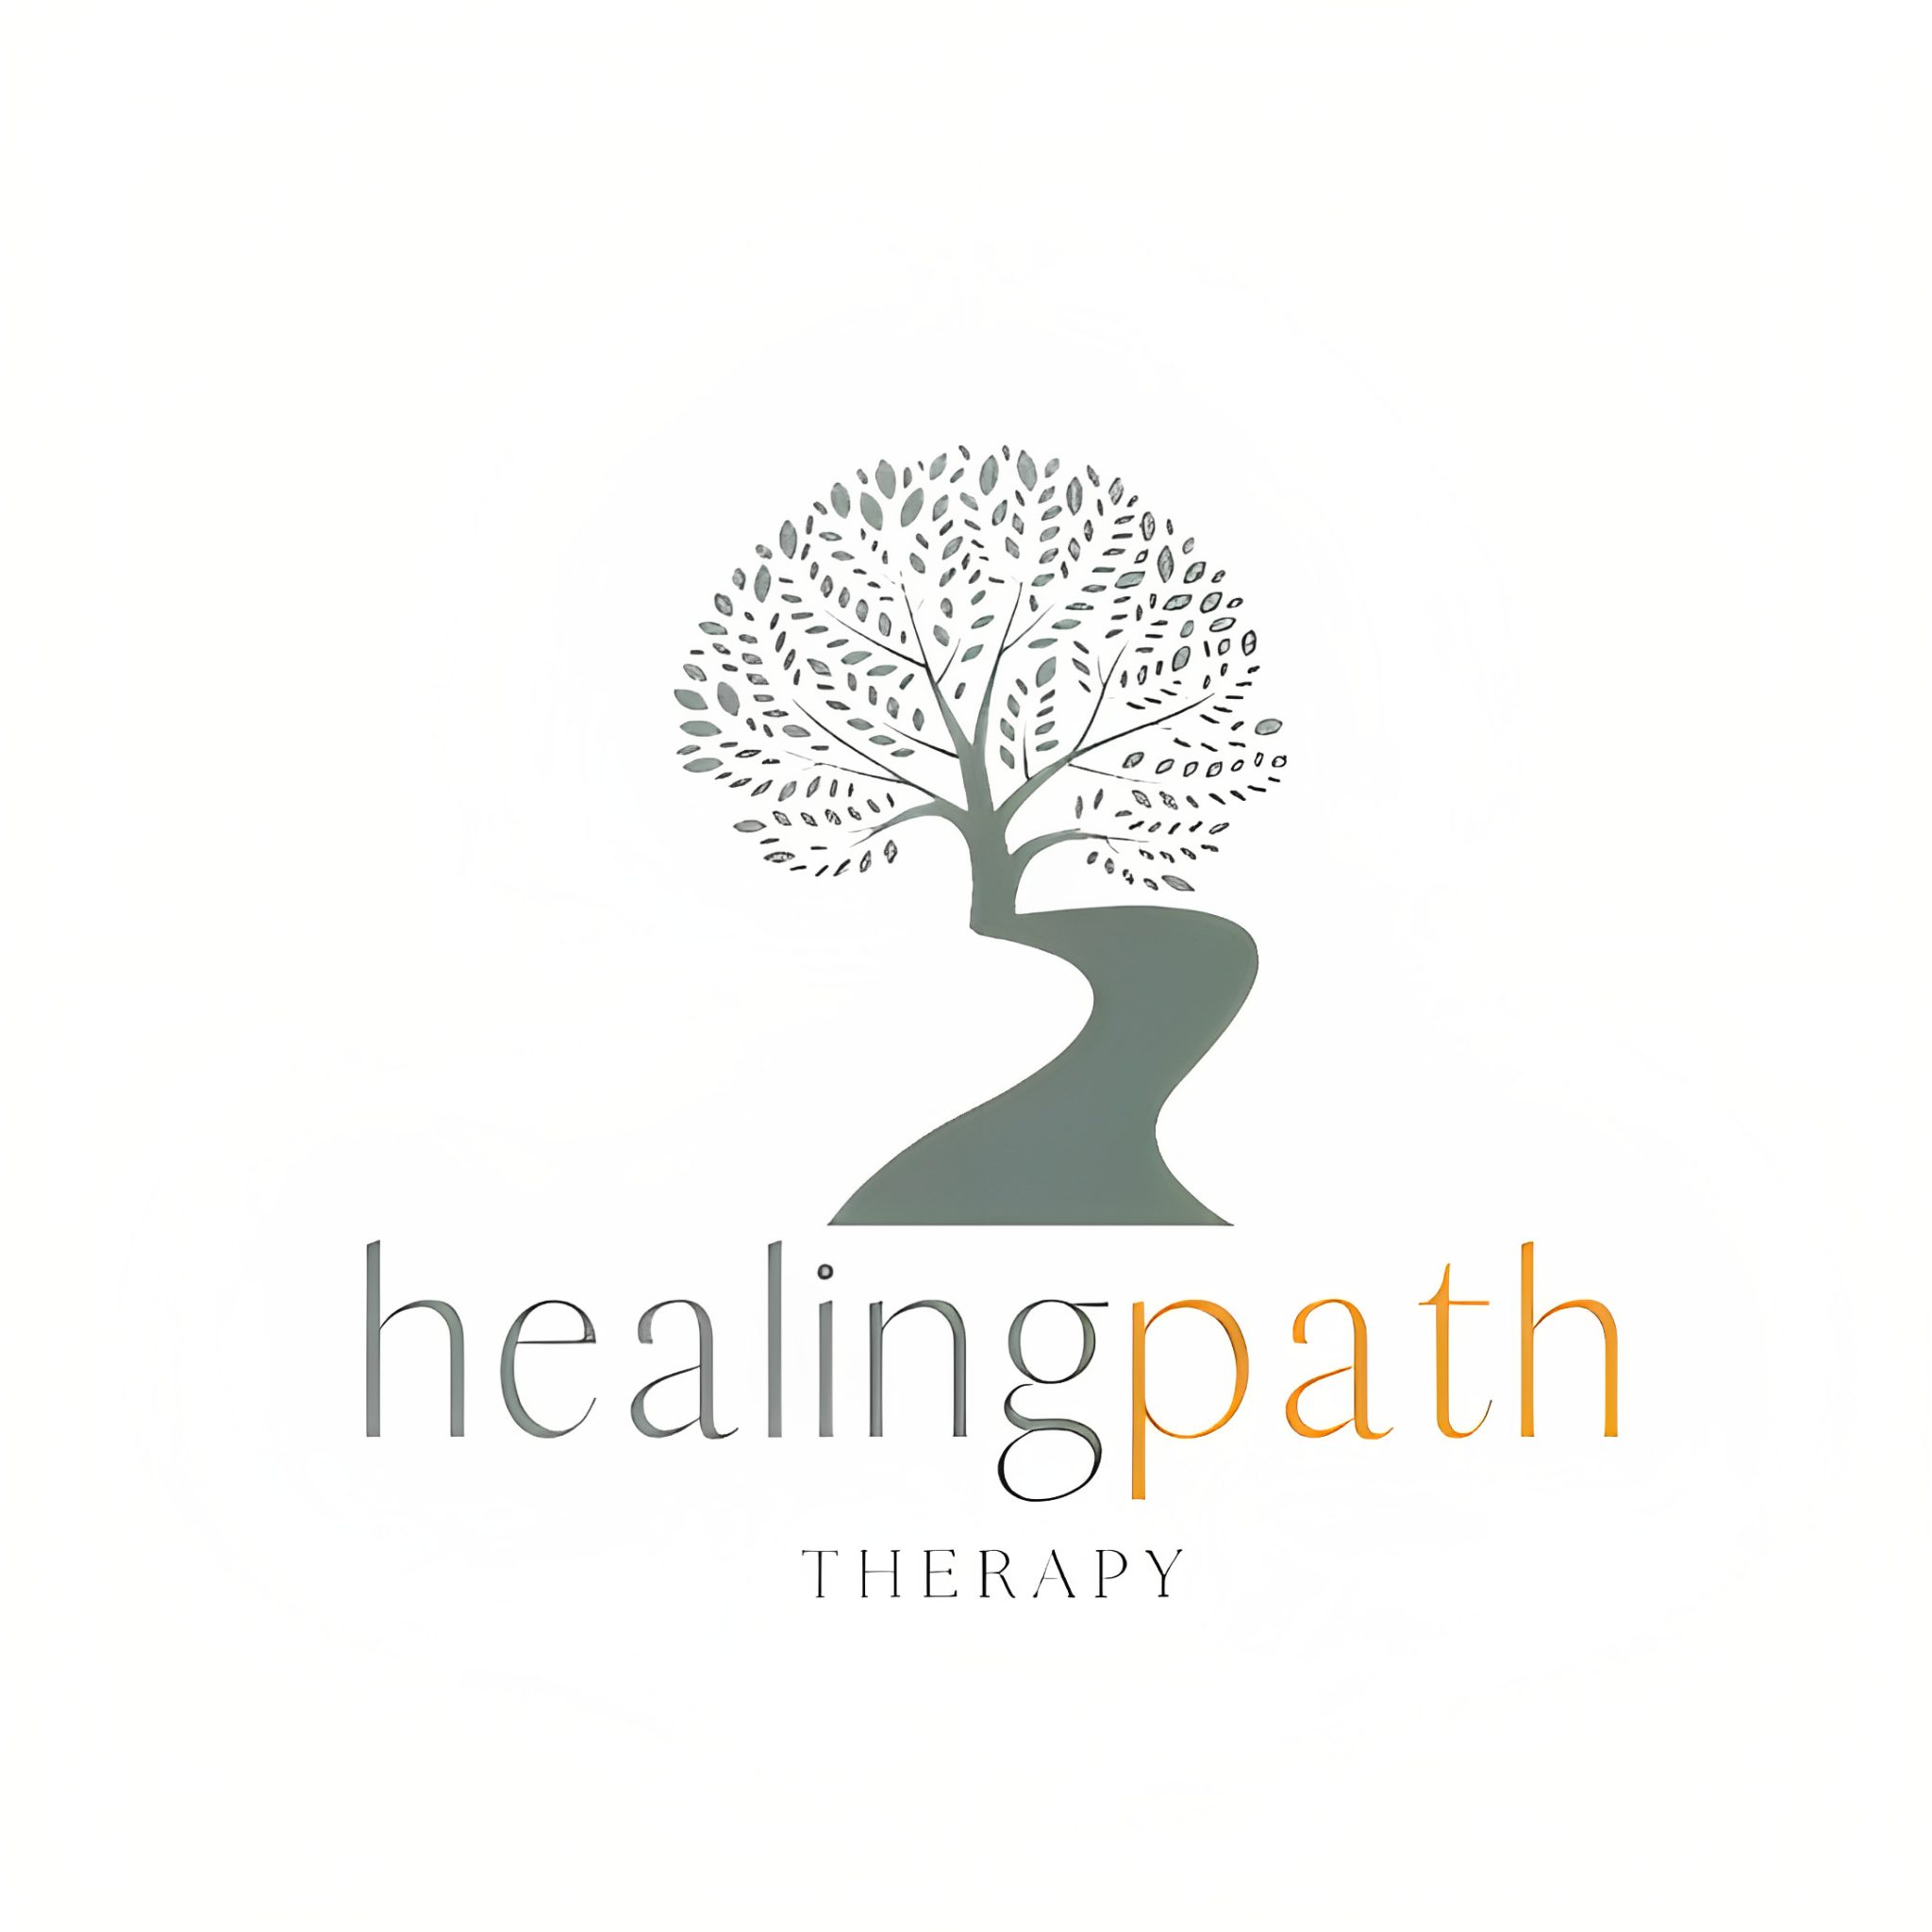 Healing Path therapy logo of a tree.